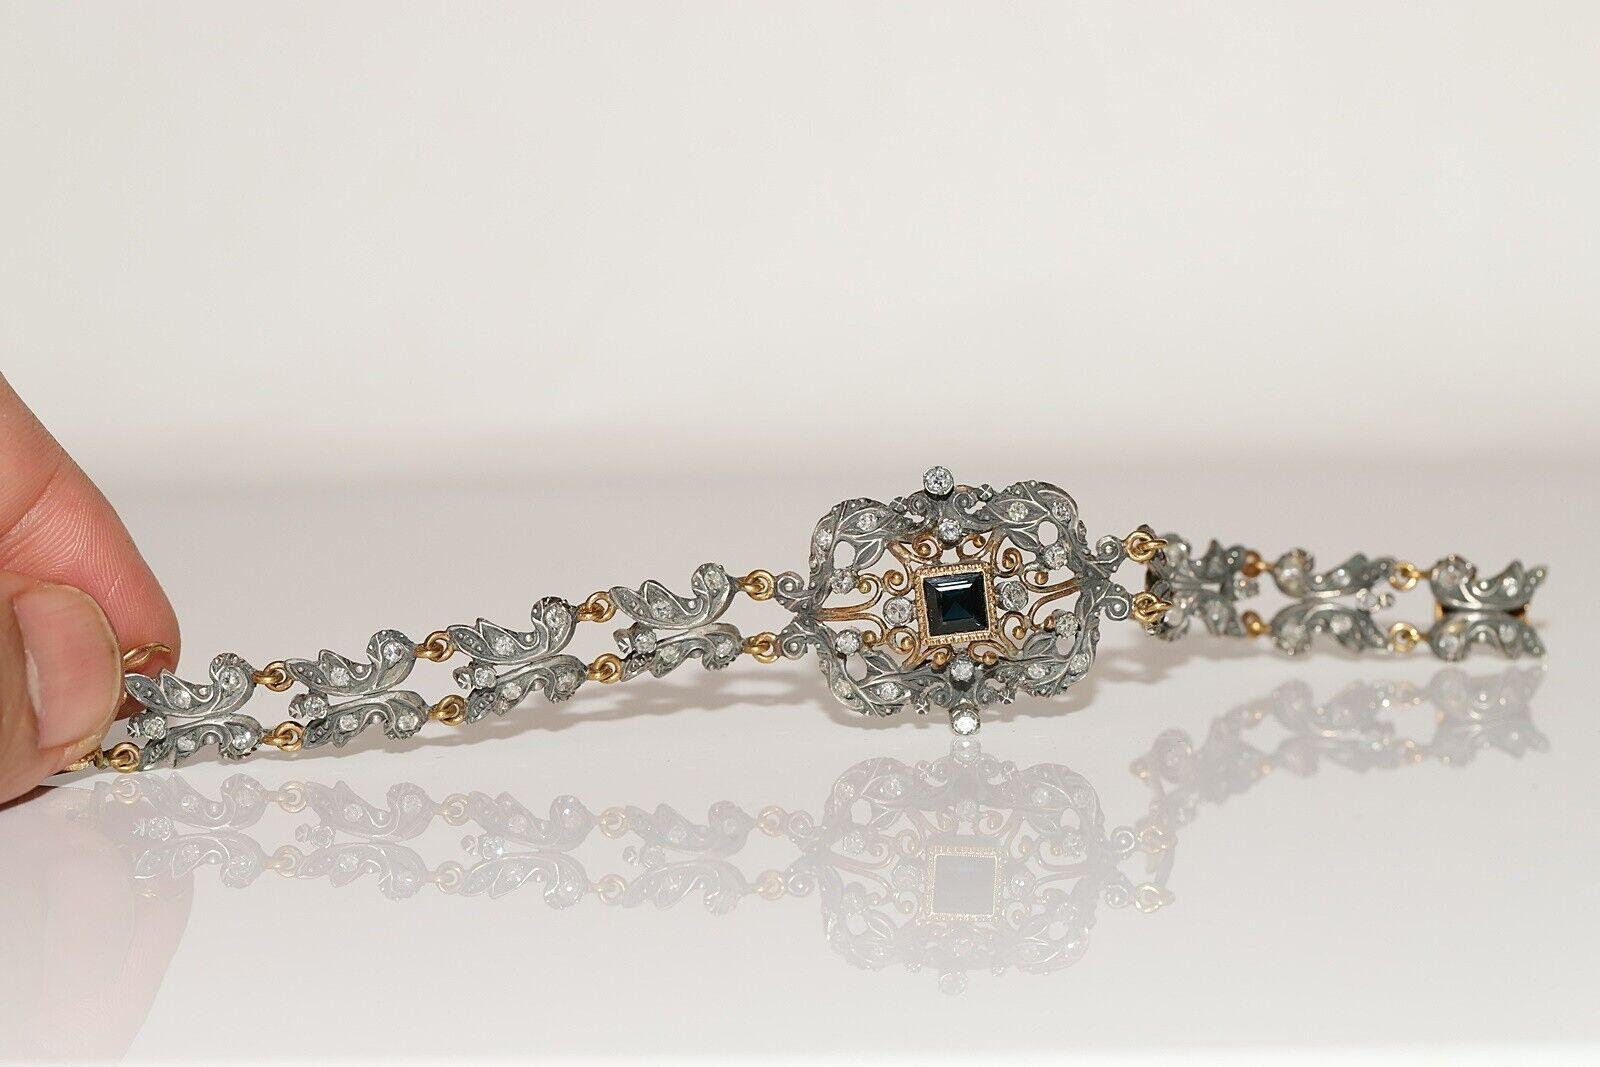 Antique Circa 1870s 18k Gold Top Silver Natural Diamond And Sapphire Bracelet For Sale 7